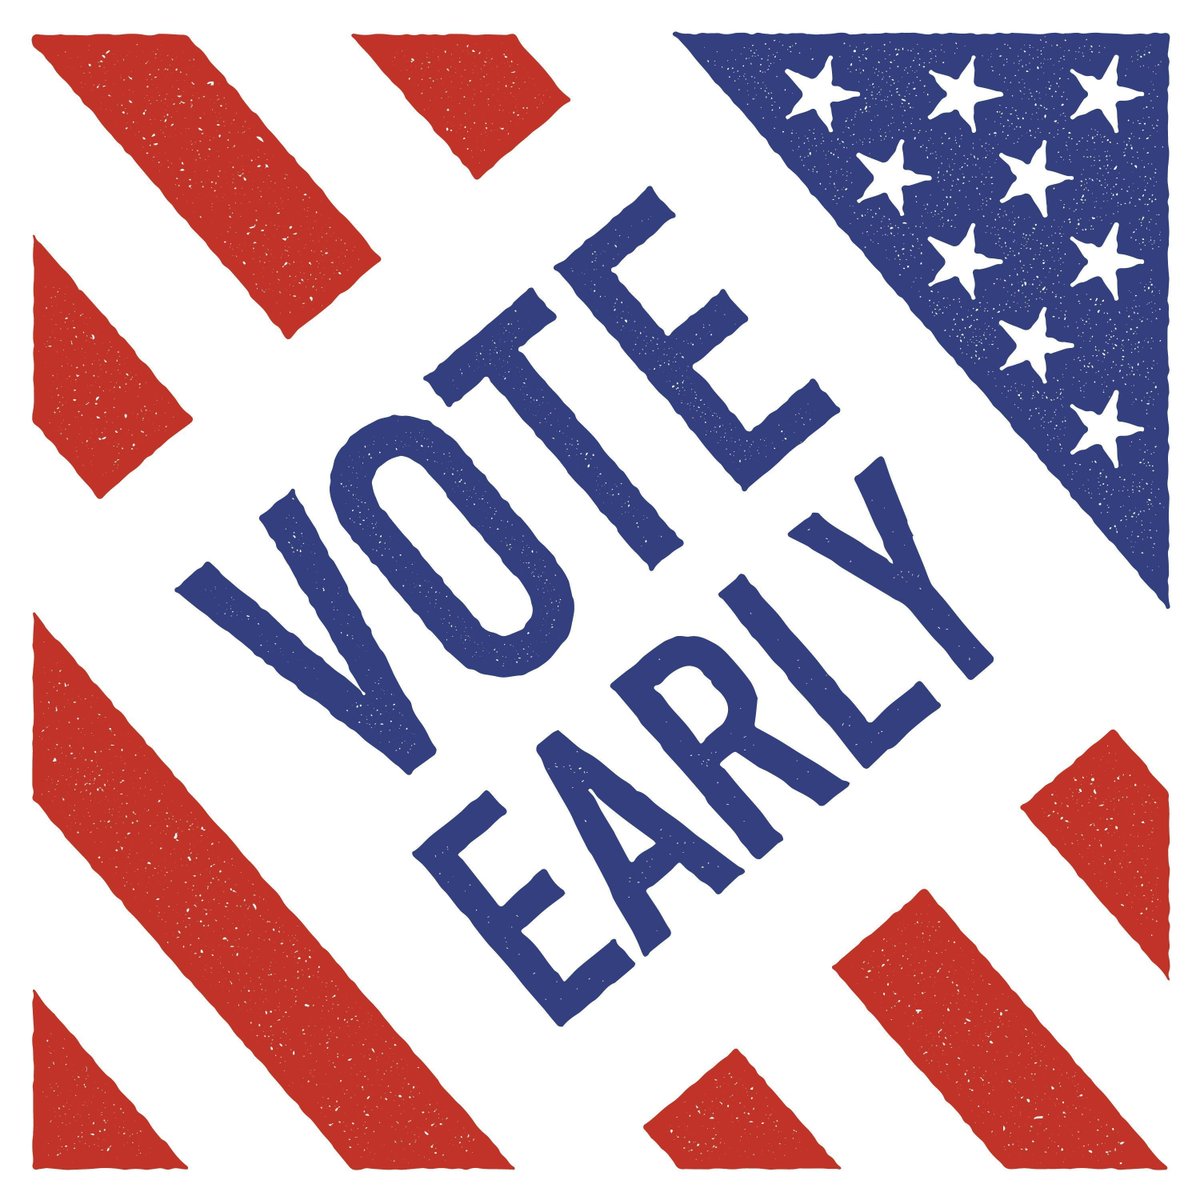 Early voting for the spring primary election starts today and runs through March 1.

Voters with disabilities who are having trouble voting can call our Voting Rights Hotline at 1-888-796-VOTE (8683). We're standing by to help.

#TexasVotes #VoteReady #DisabilityVote